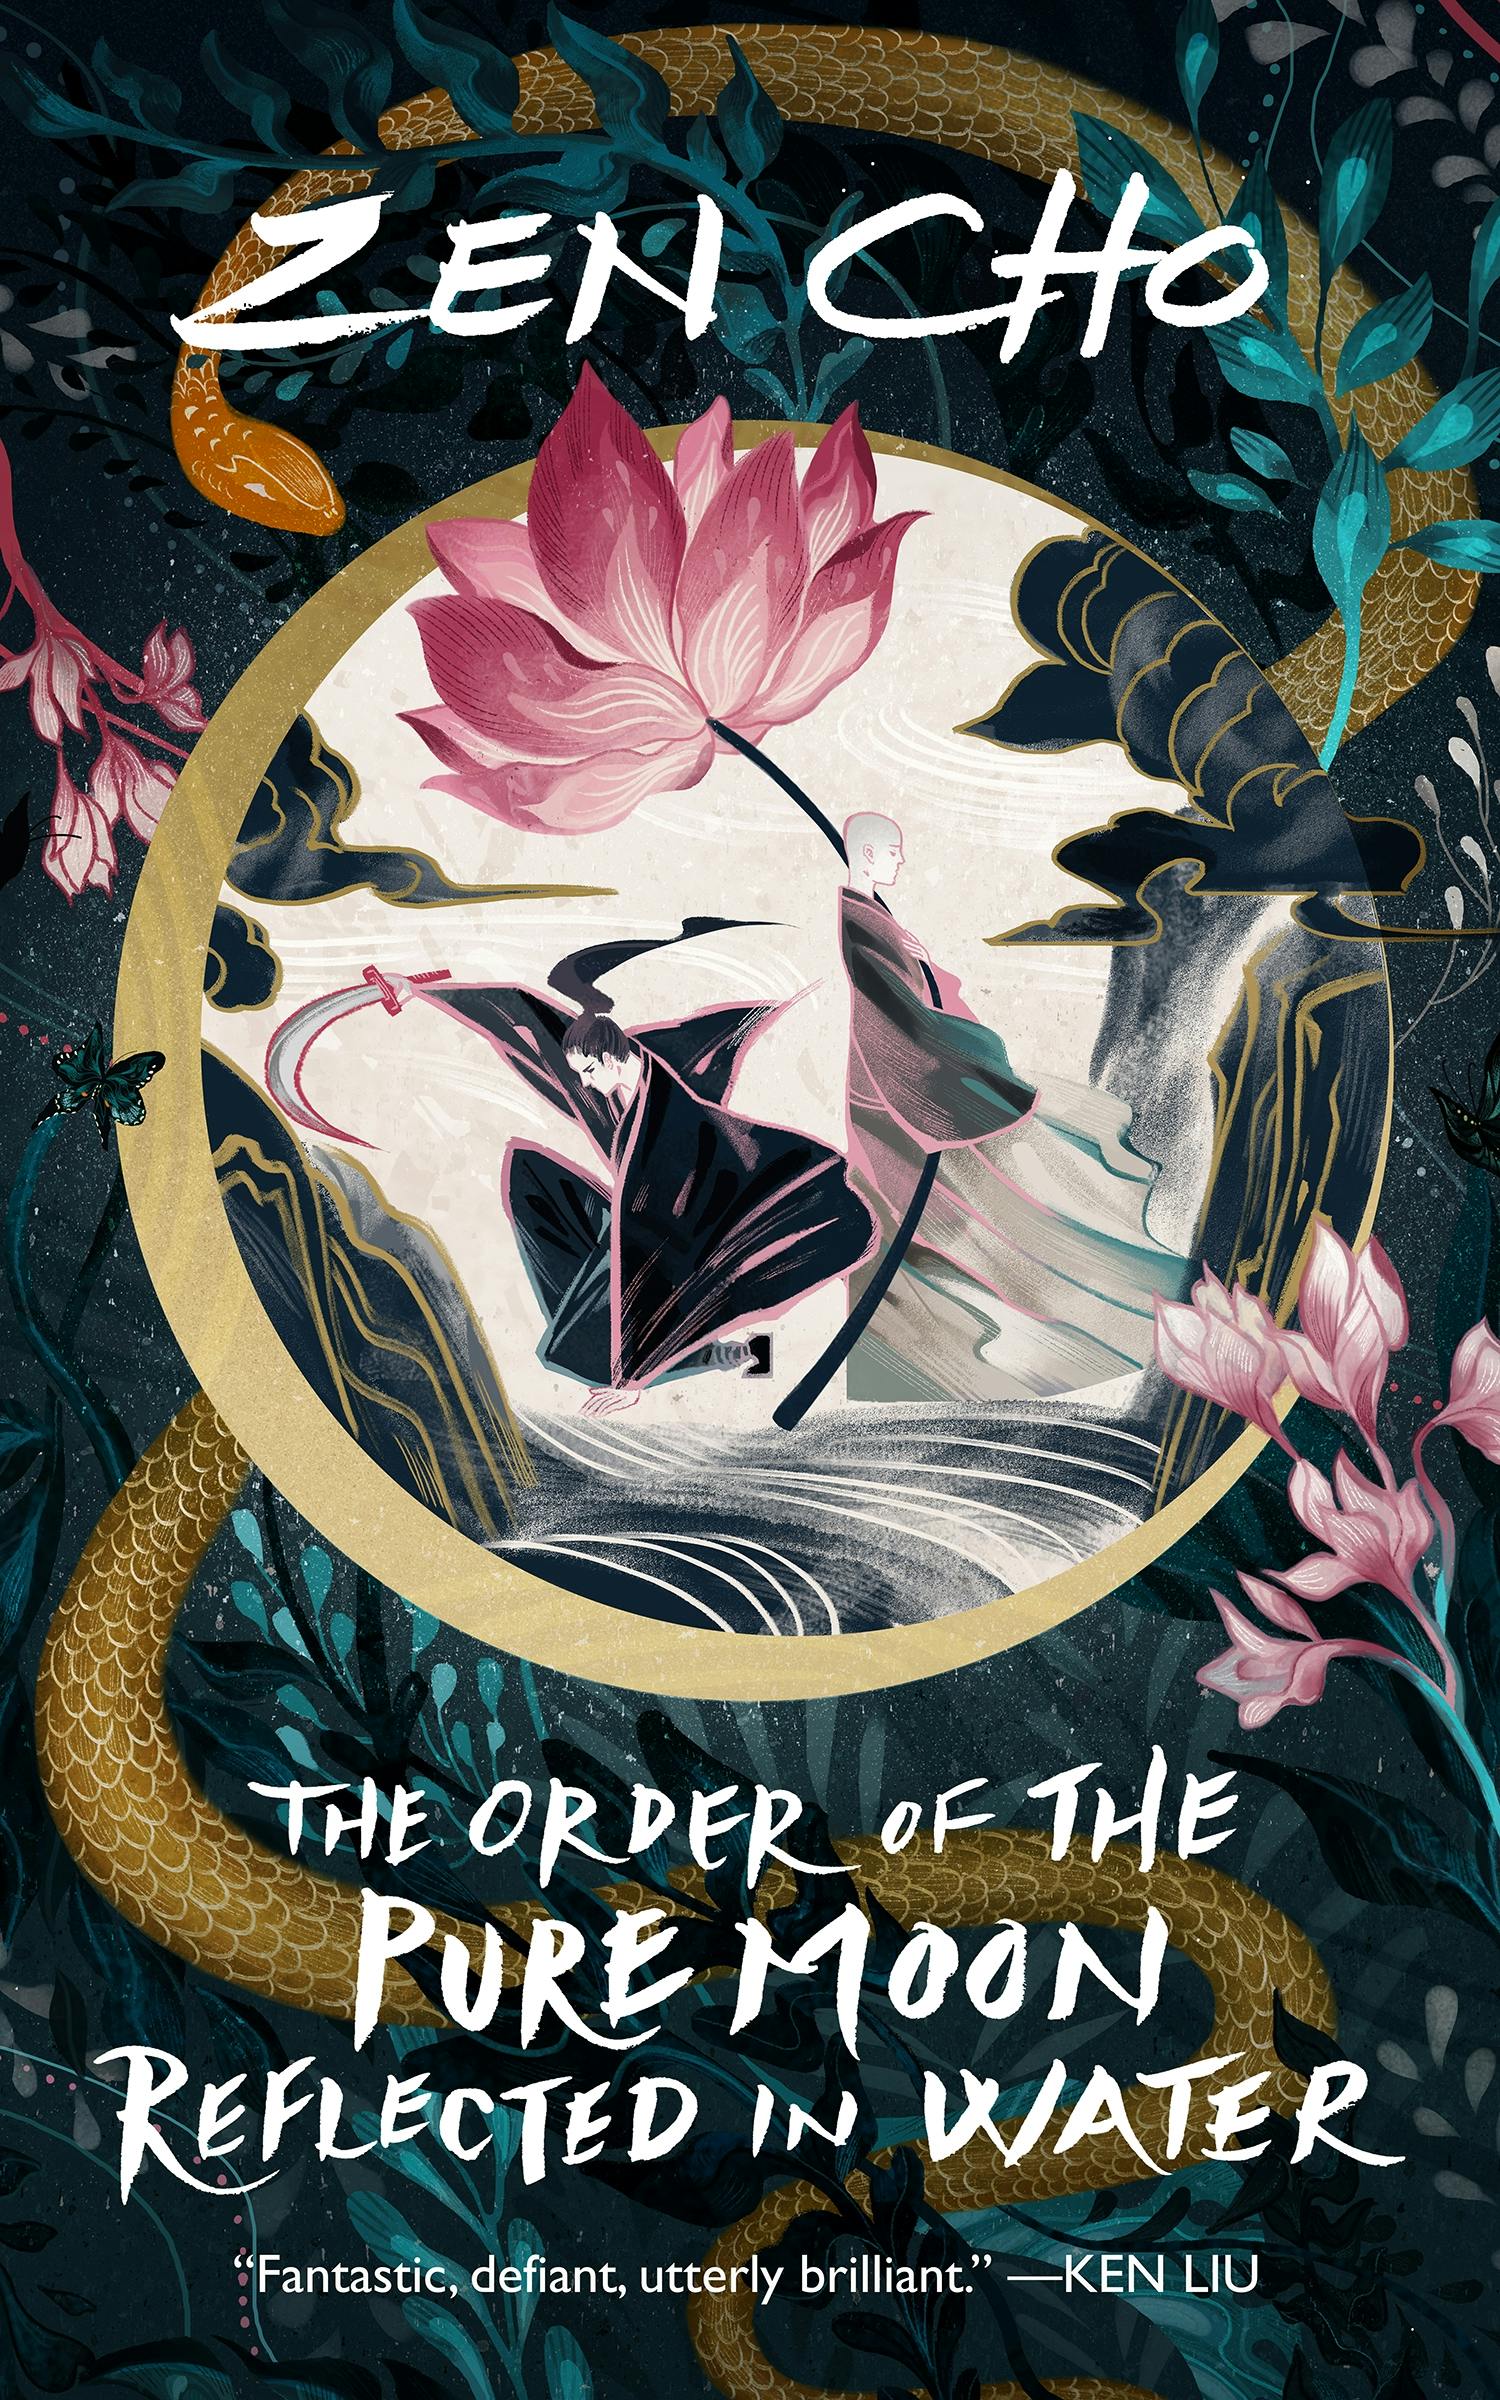 Cover for the book titled as: The Order of the Pure Moon Reflected in Water